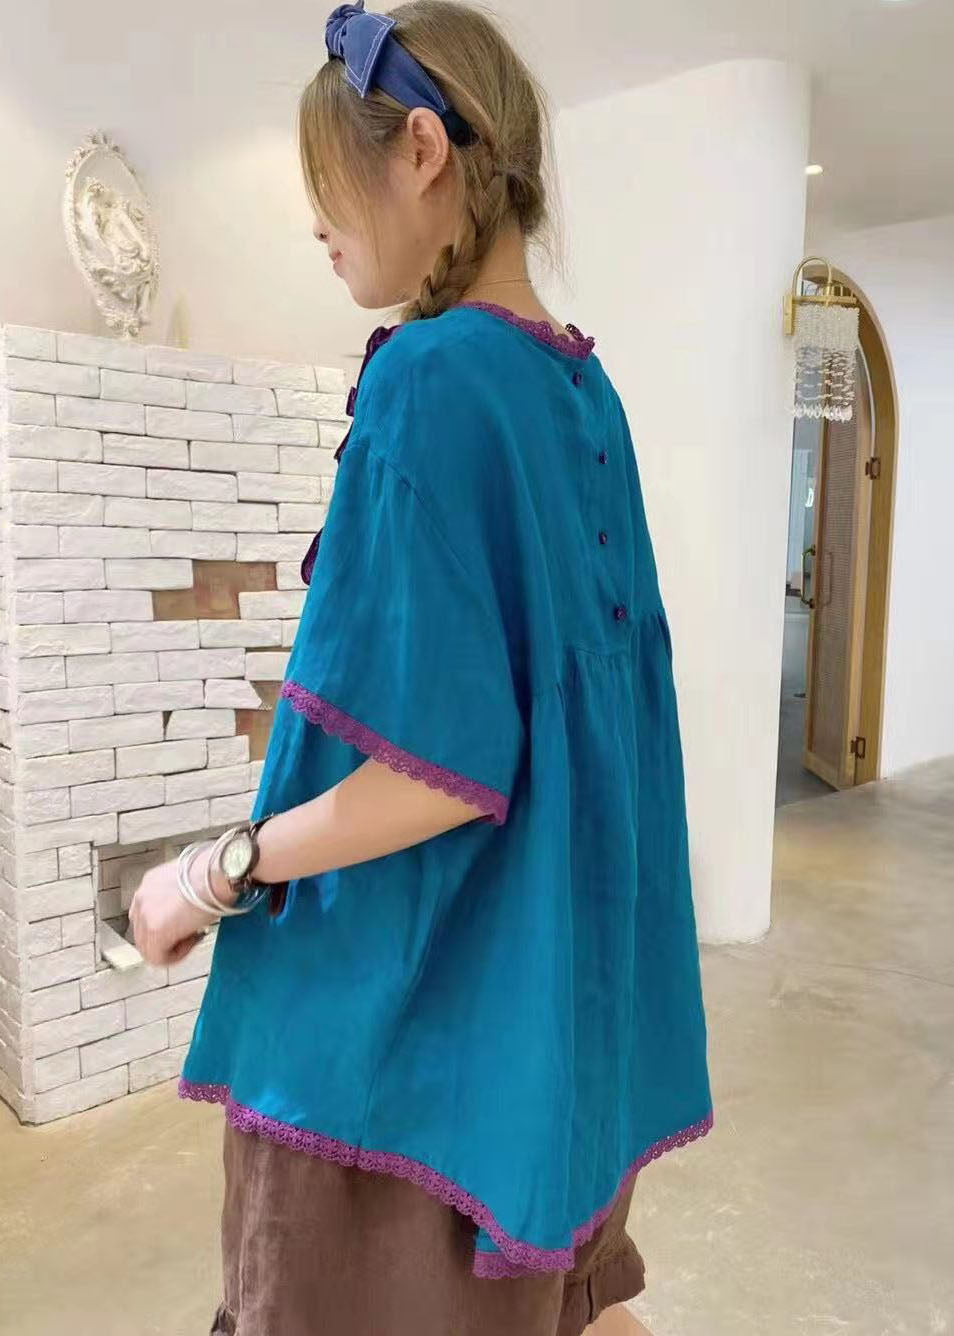 Style Blue Embroideried Patchwork Cotton Shirt Short Sleeve